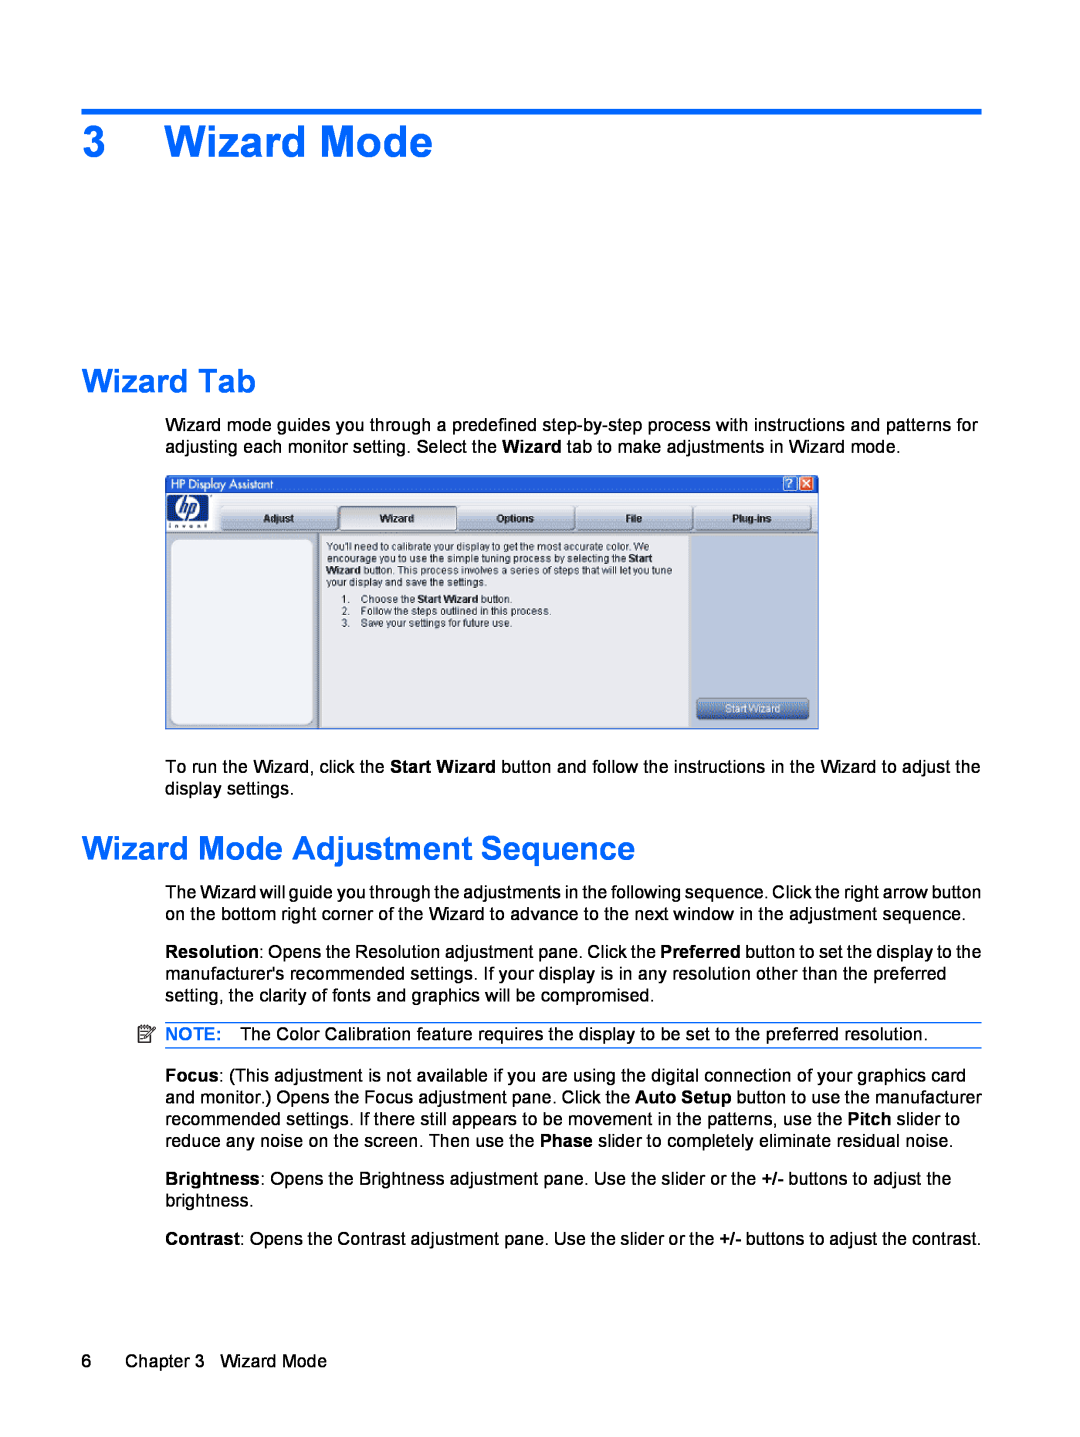 HP L1950 19-inch manual Wizard Tab, Wizard Mode Adjustment Sequence 